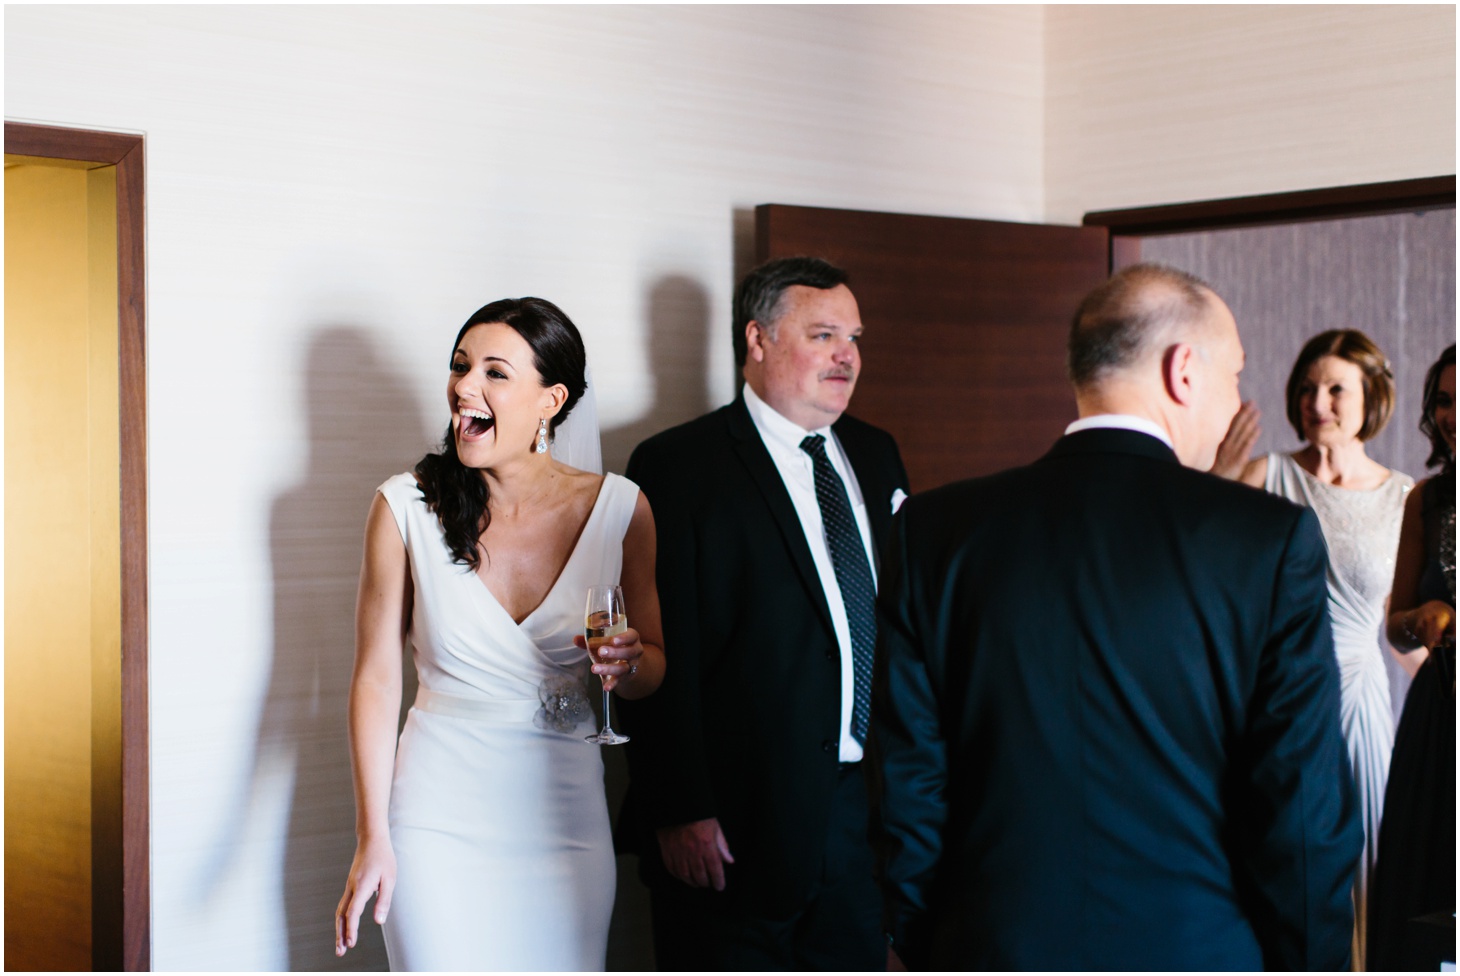 Mikey & Megan, Downtown DC Wedding at National Museum of Women in the Arts by Sarah Bradshaw Photography_0012.jpg